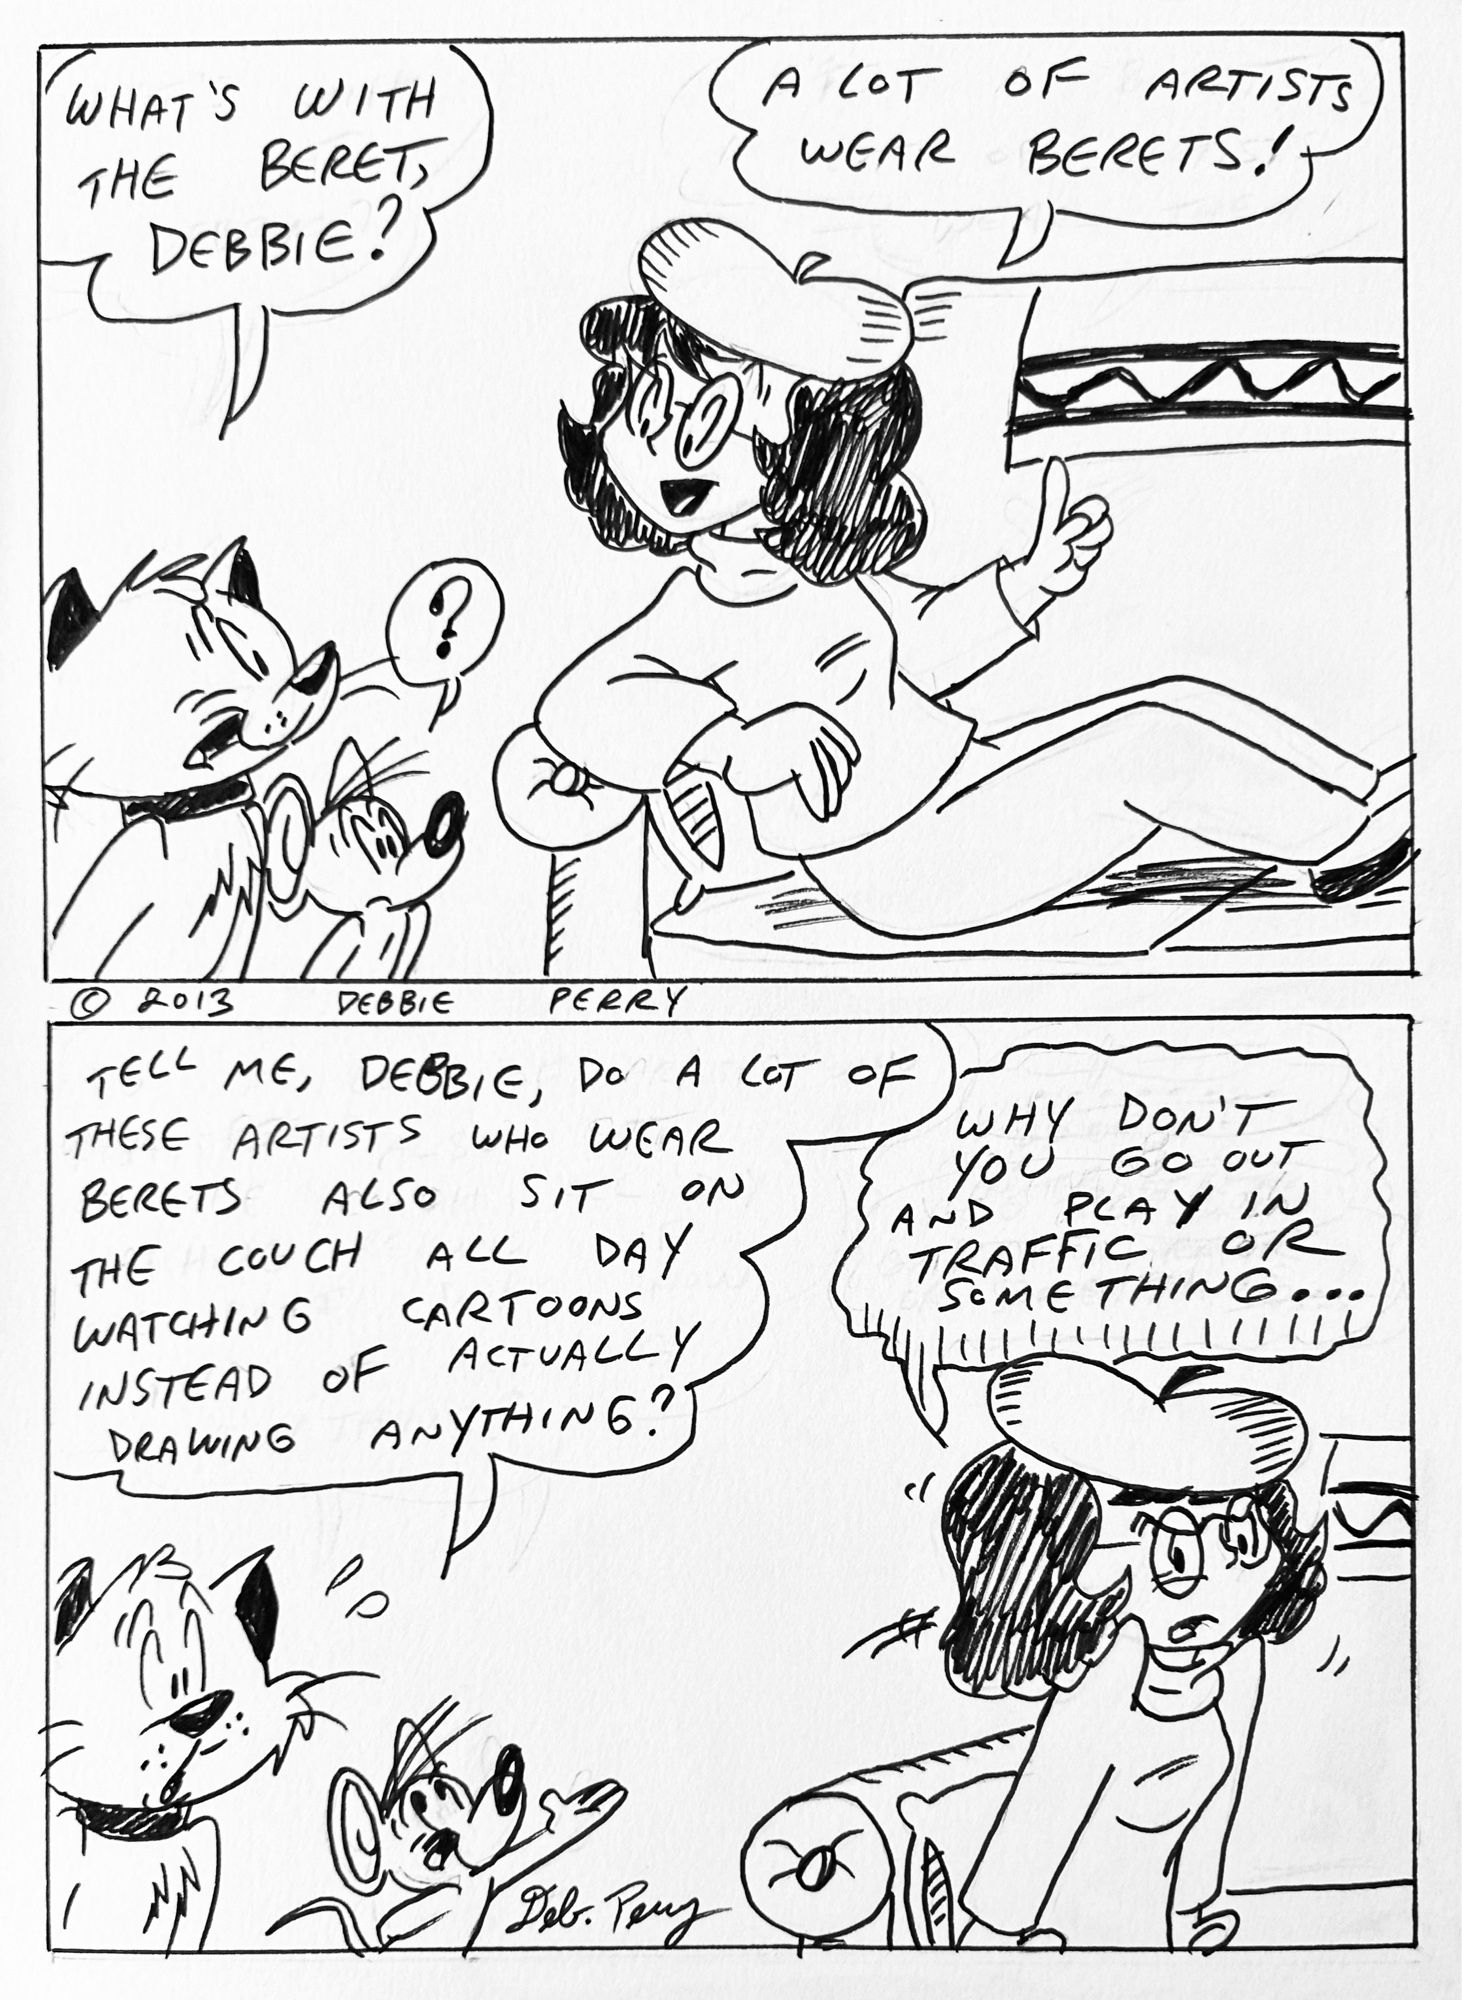 Heres a page from the Fluffy and Mervin Archives:
